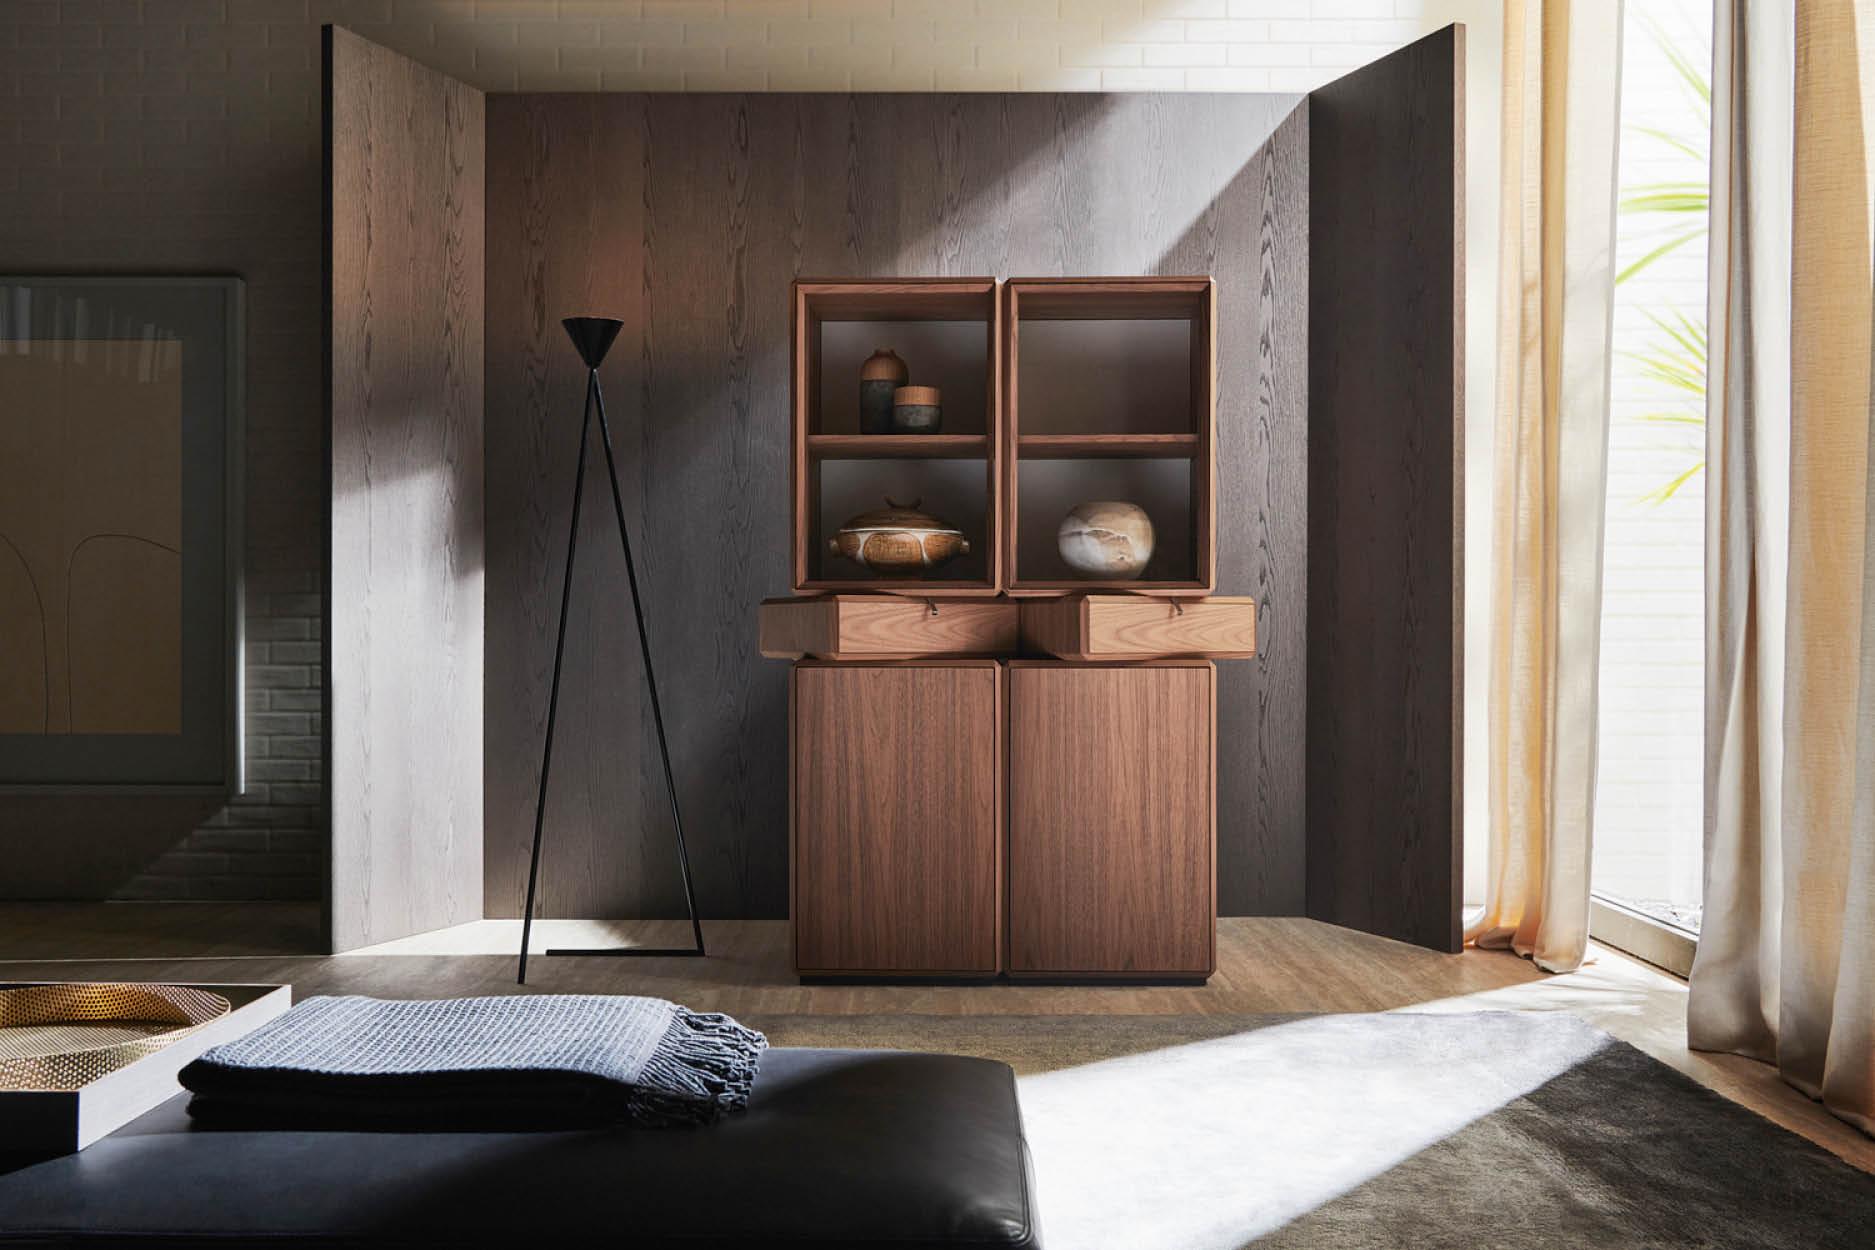 A Quintessentially Italian Bedroom Collection to Covet